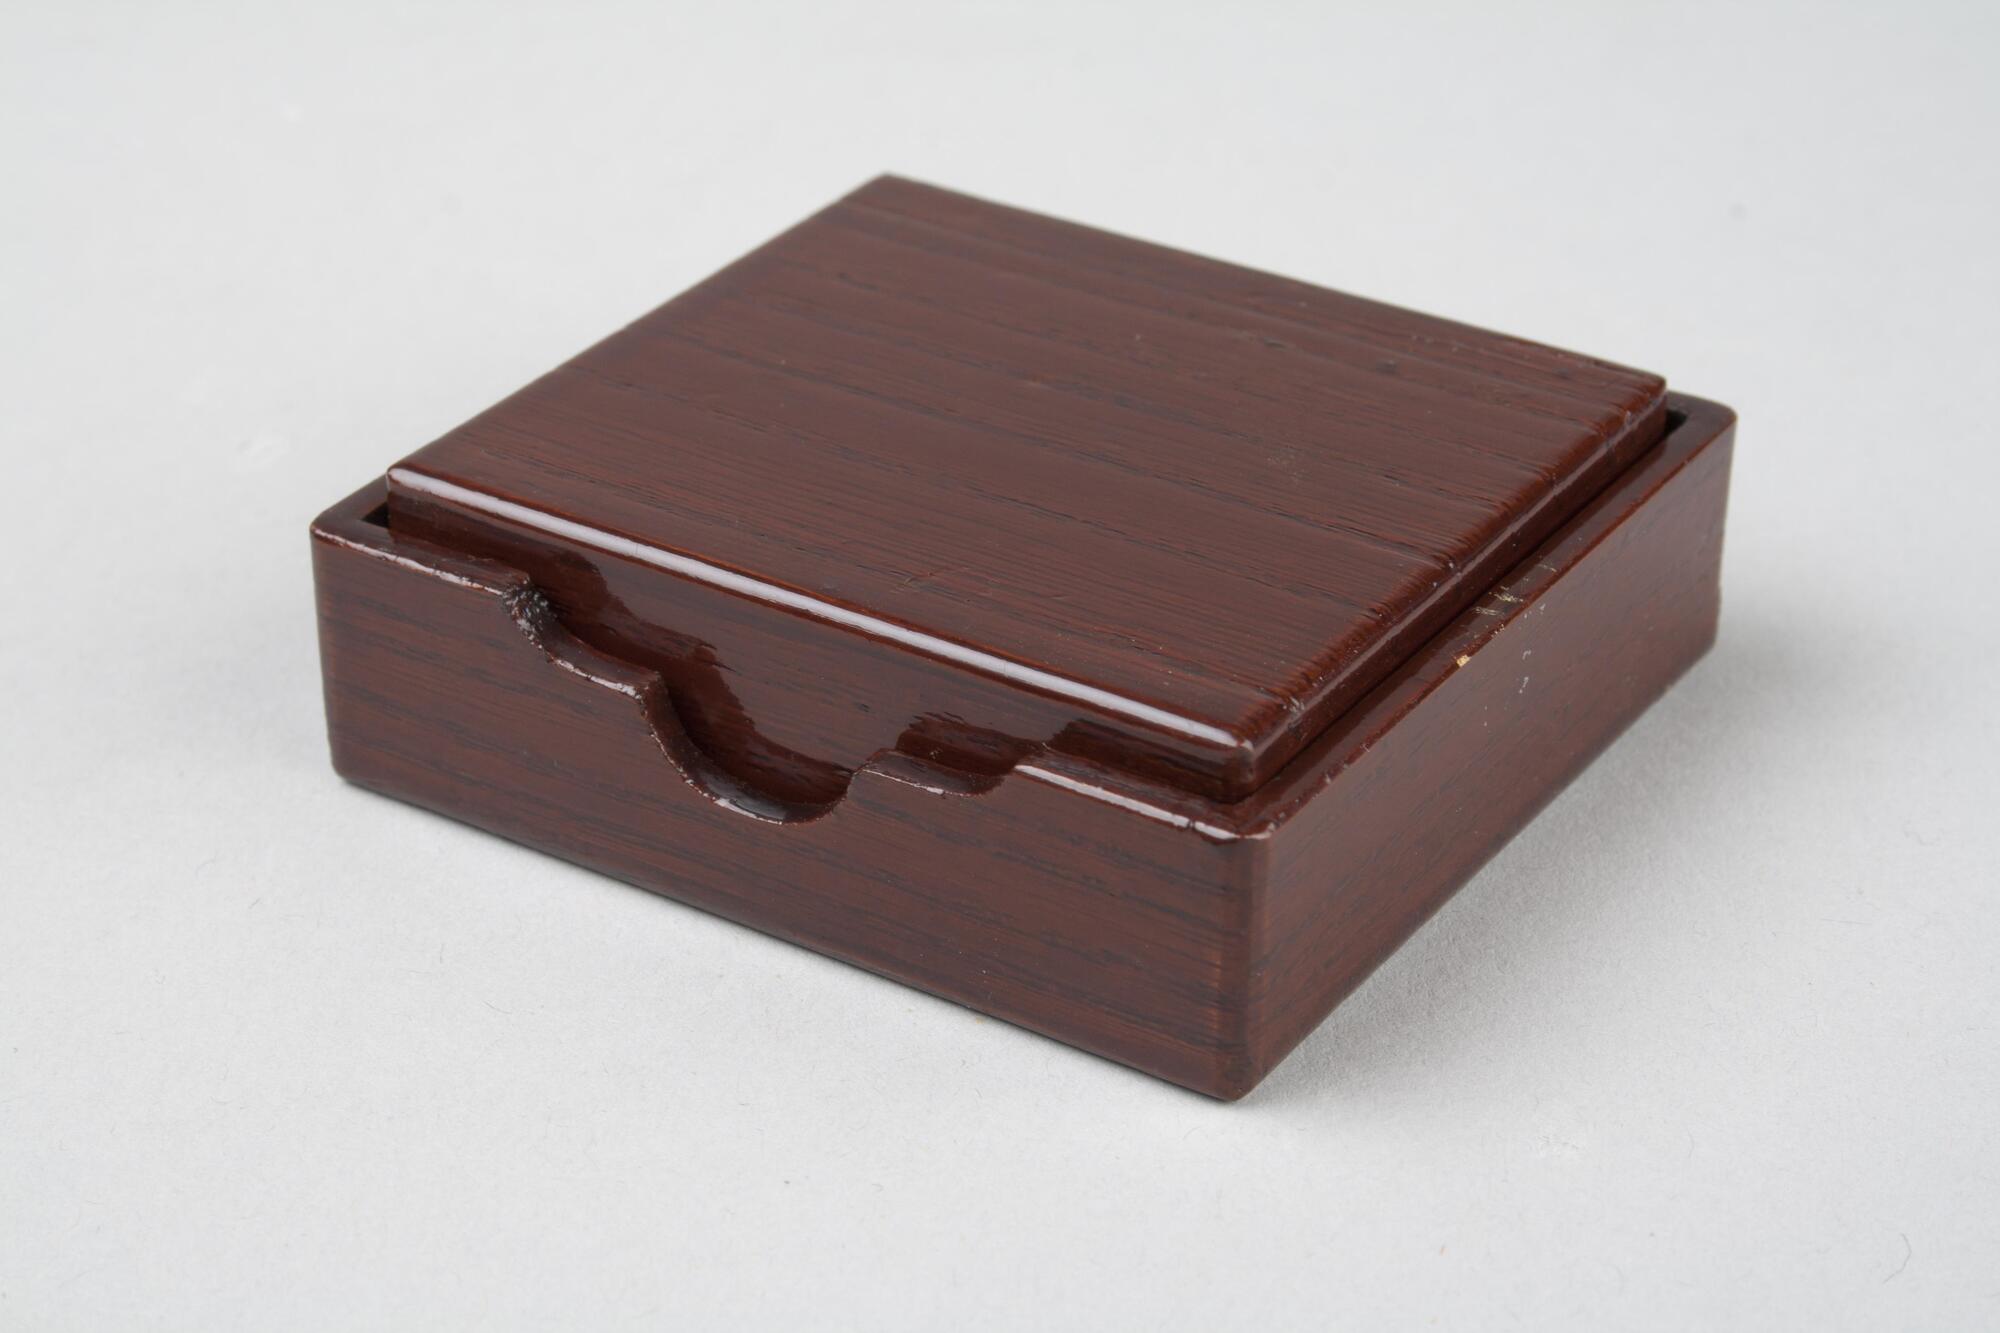 Wooden rectangular box with a lacquered finish, light wood. This is a part of a portable tea set.